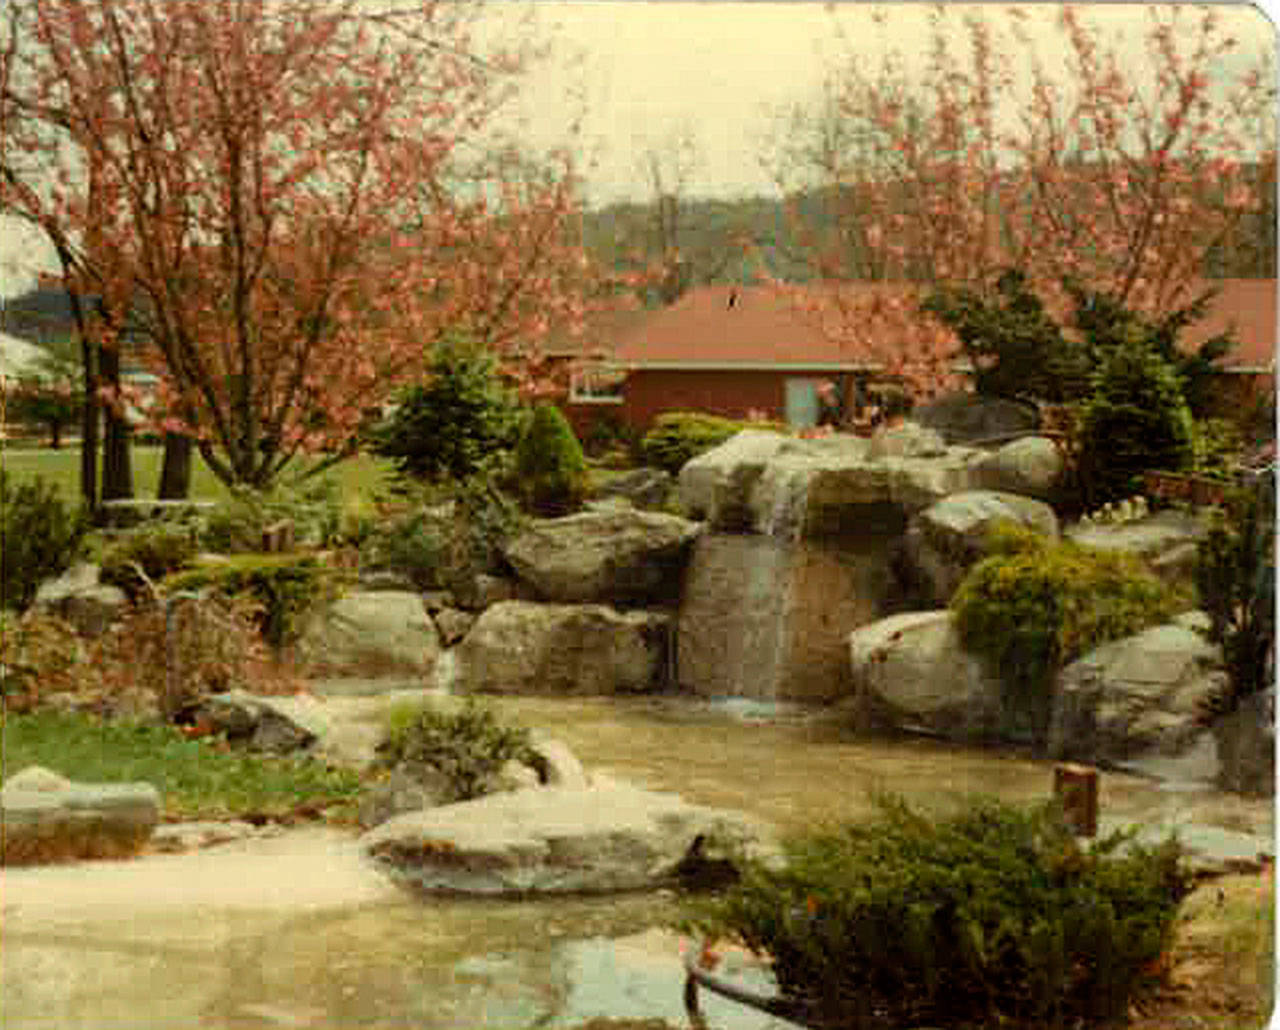 The fountain at Pioneer Memorial Park flowed freely from 1965 until sometime around 1990, when numerous mechanical and maintenance issues encouraged the city of Sequim to shut it down and cement it over. (Sequim Prairie Garden Club)